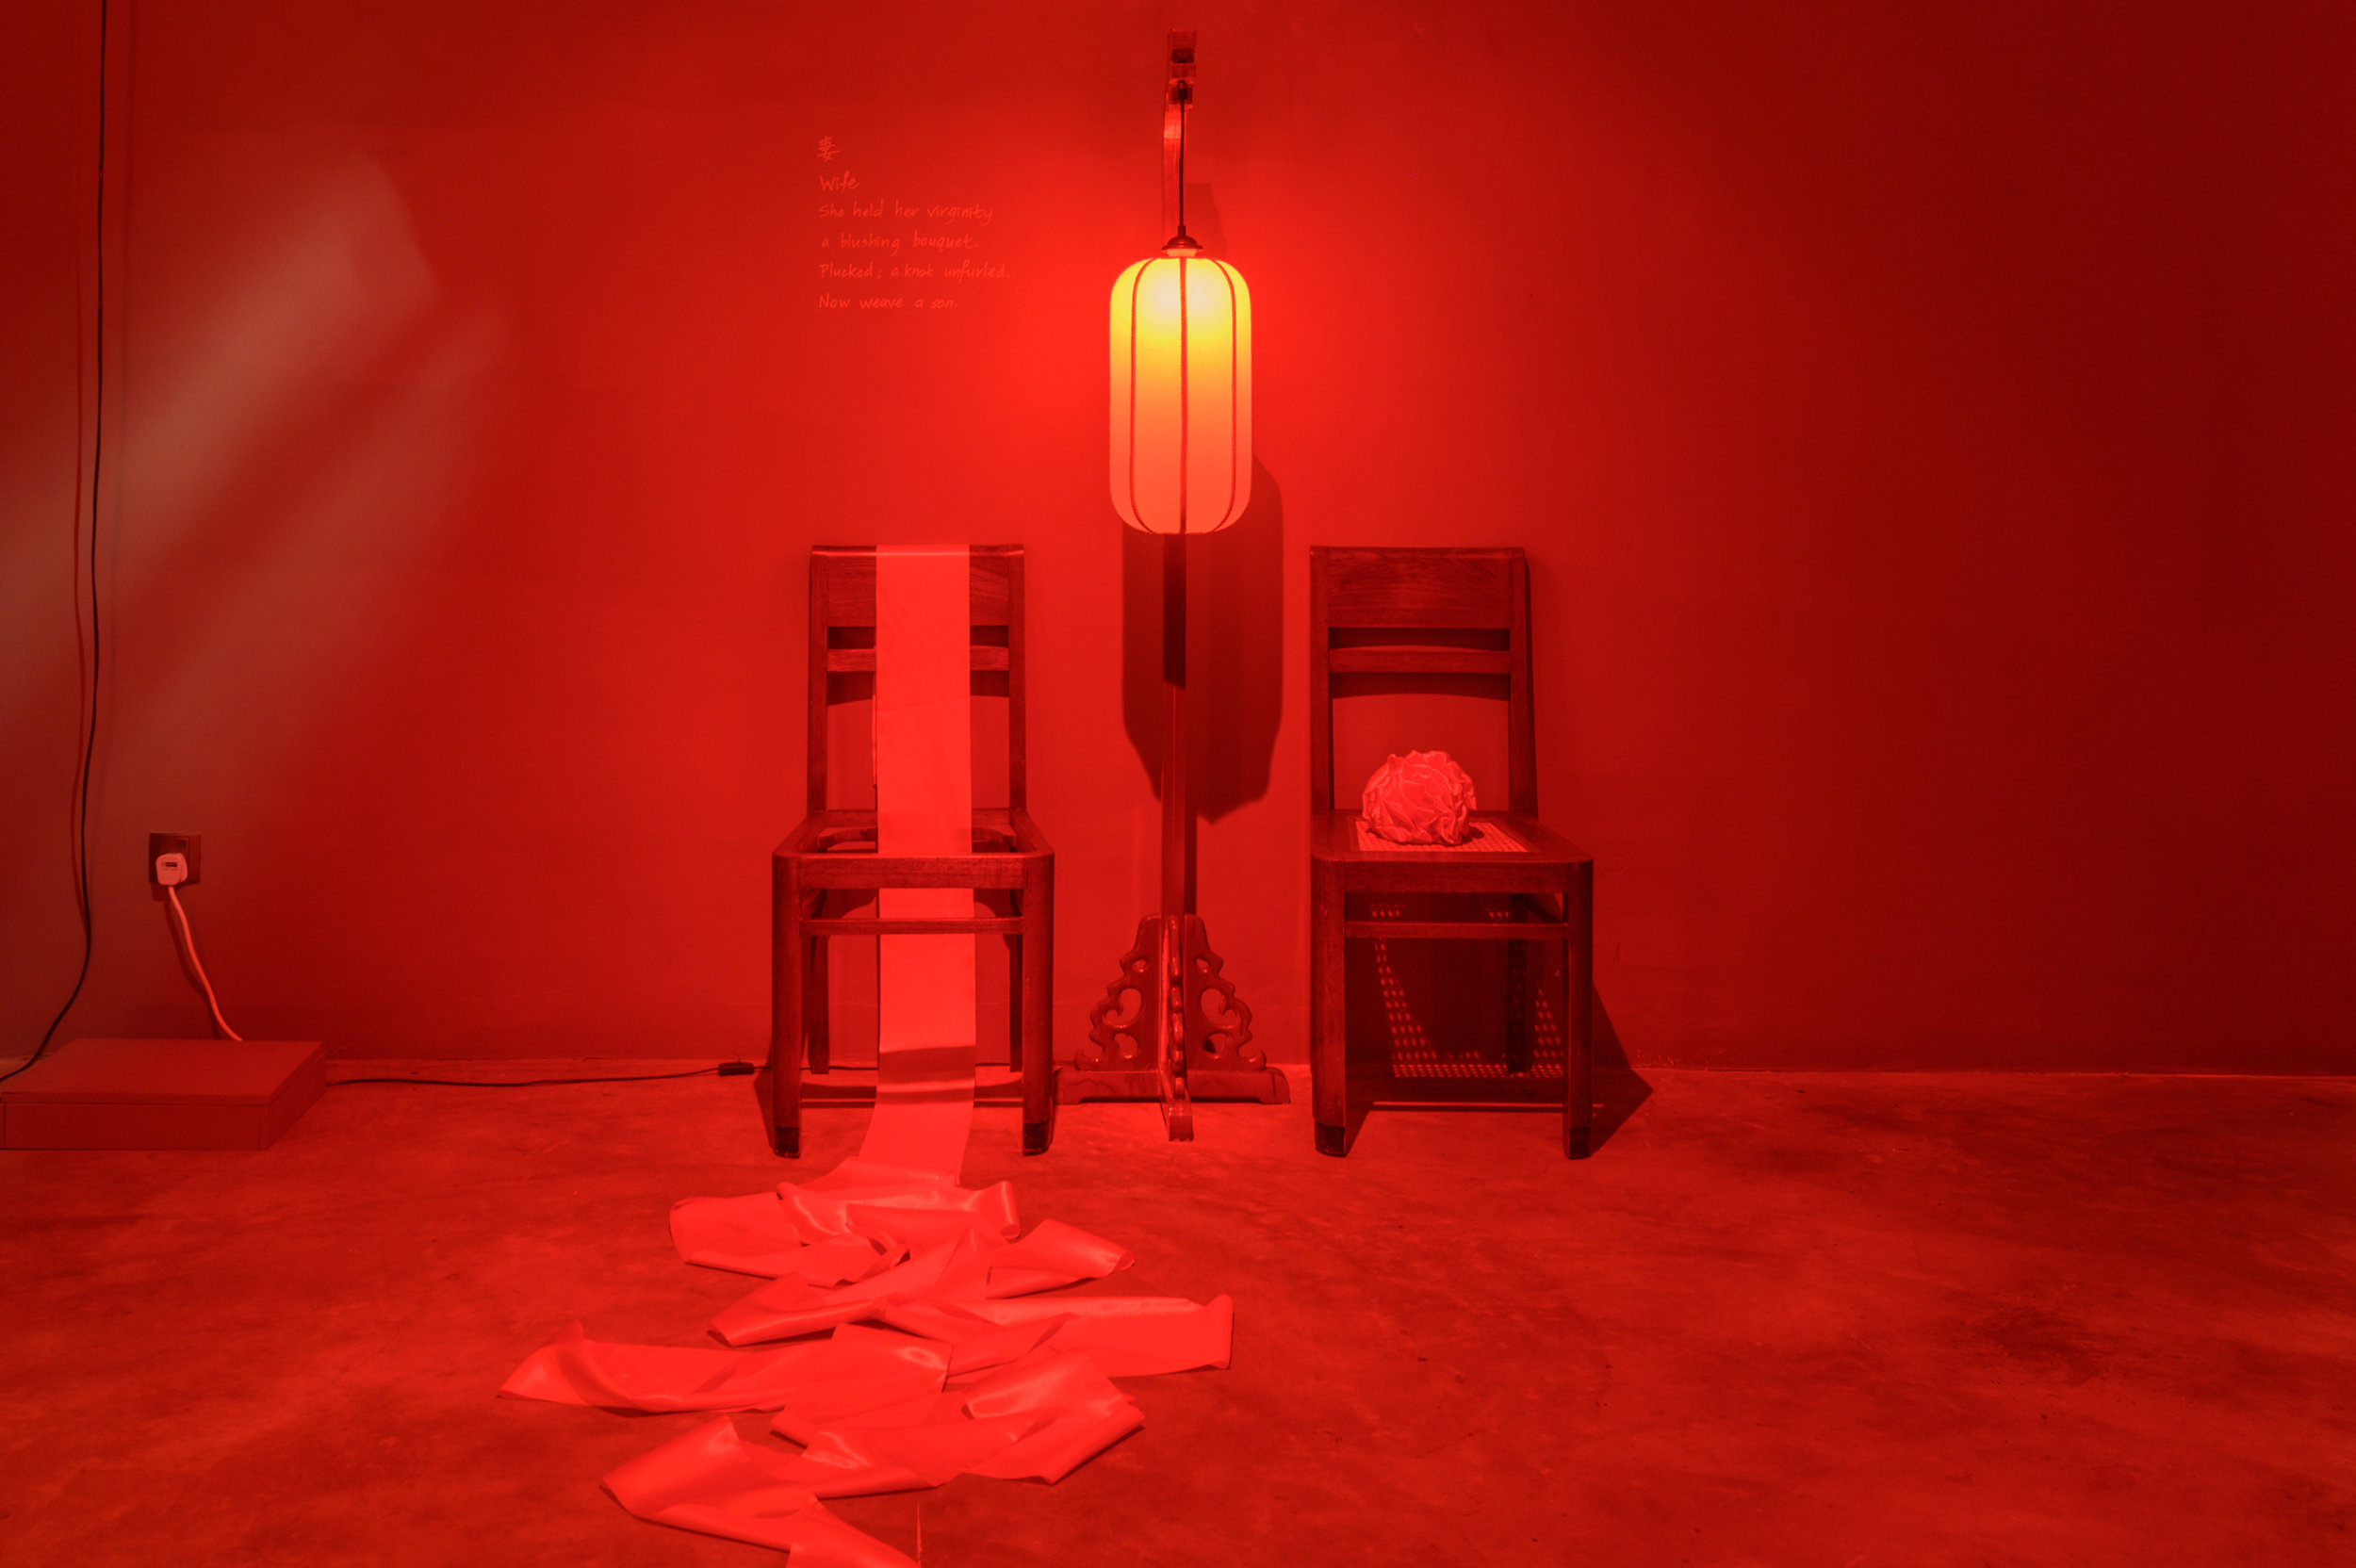   Wife - Stories of a Woman and Her Dowry  2019 Lantern, teak chairs, red ribbons ; Installation 